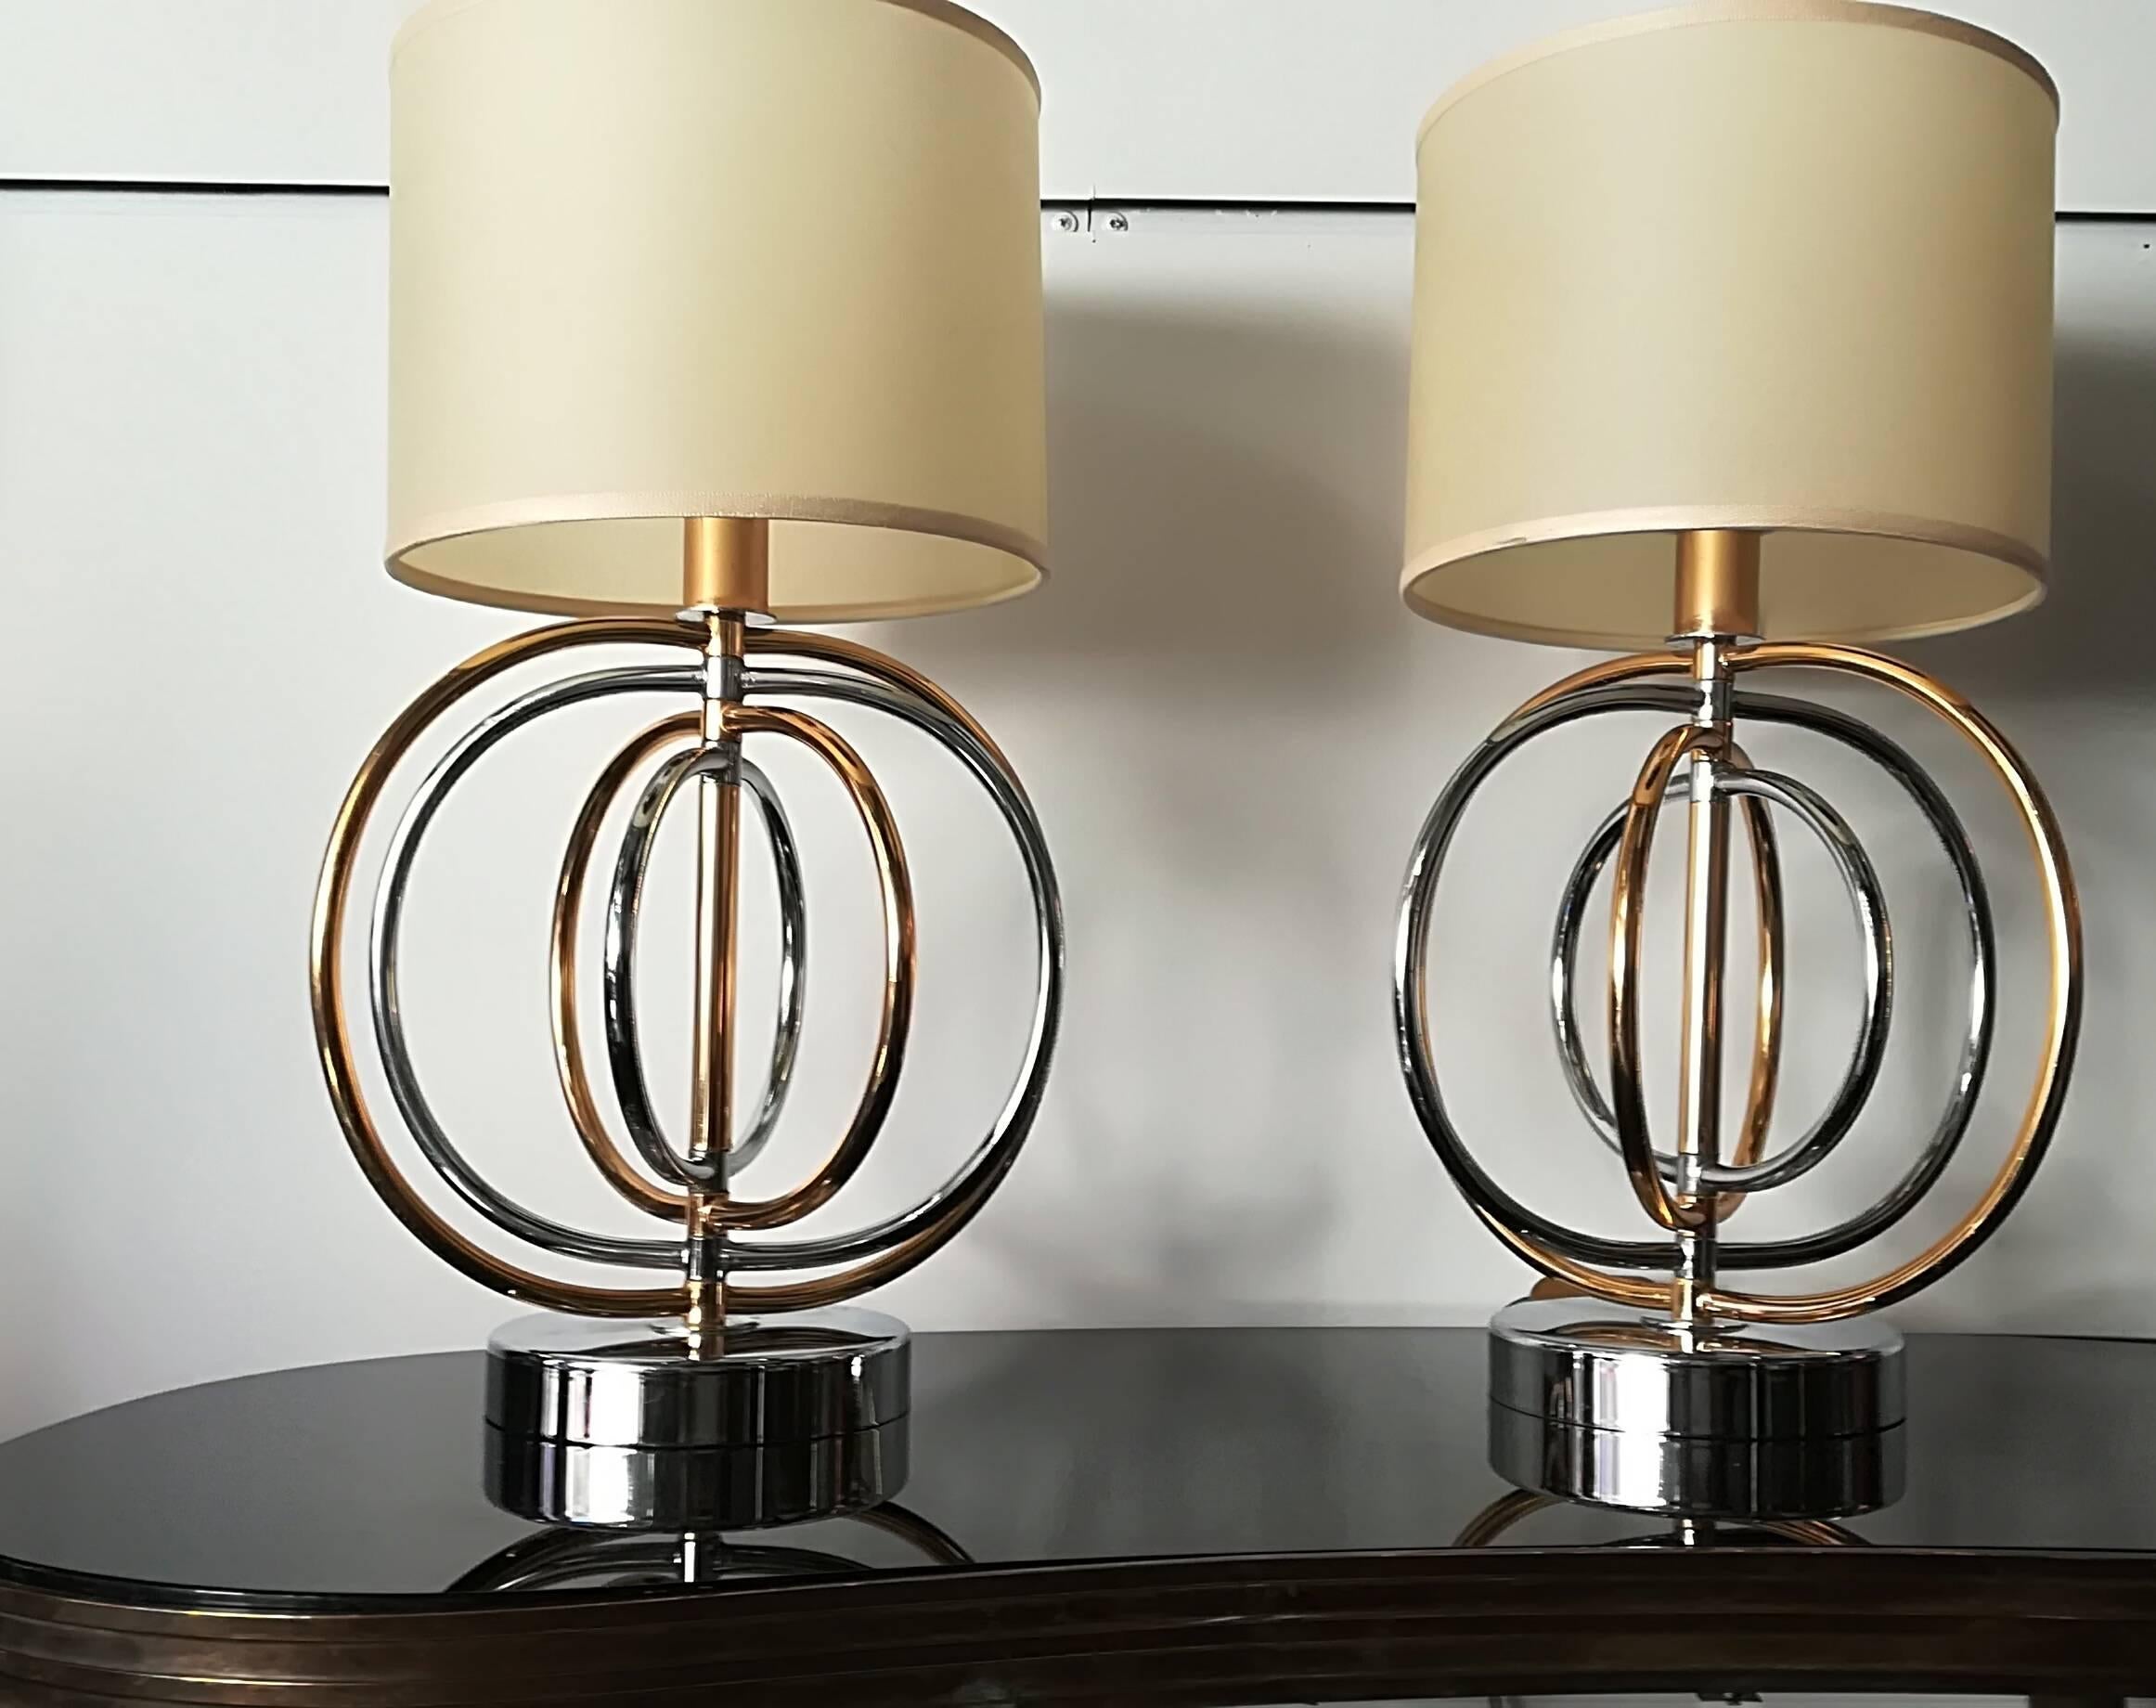 Pair of floor lamp 1960, brass, gold and nickel. The structure may have drawings different.